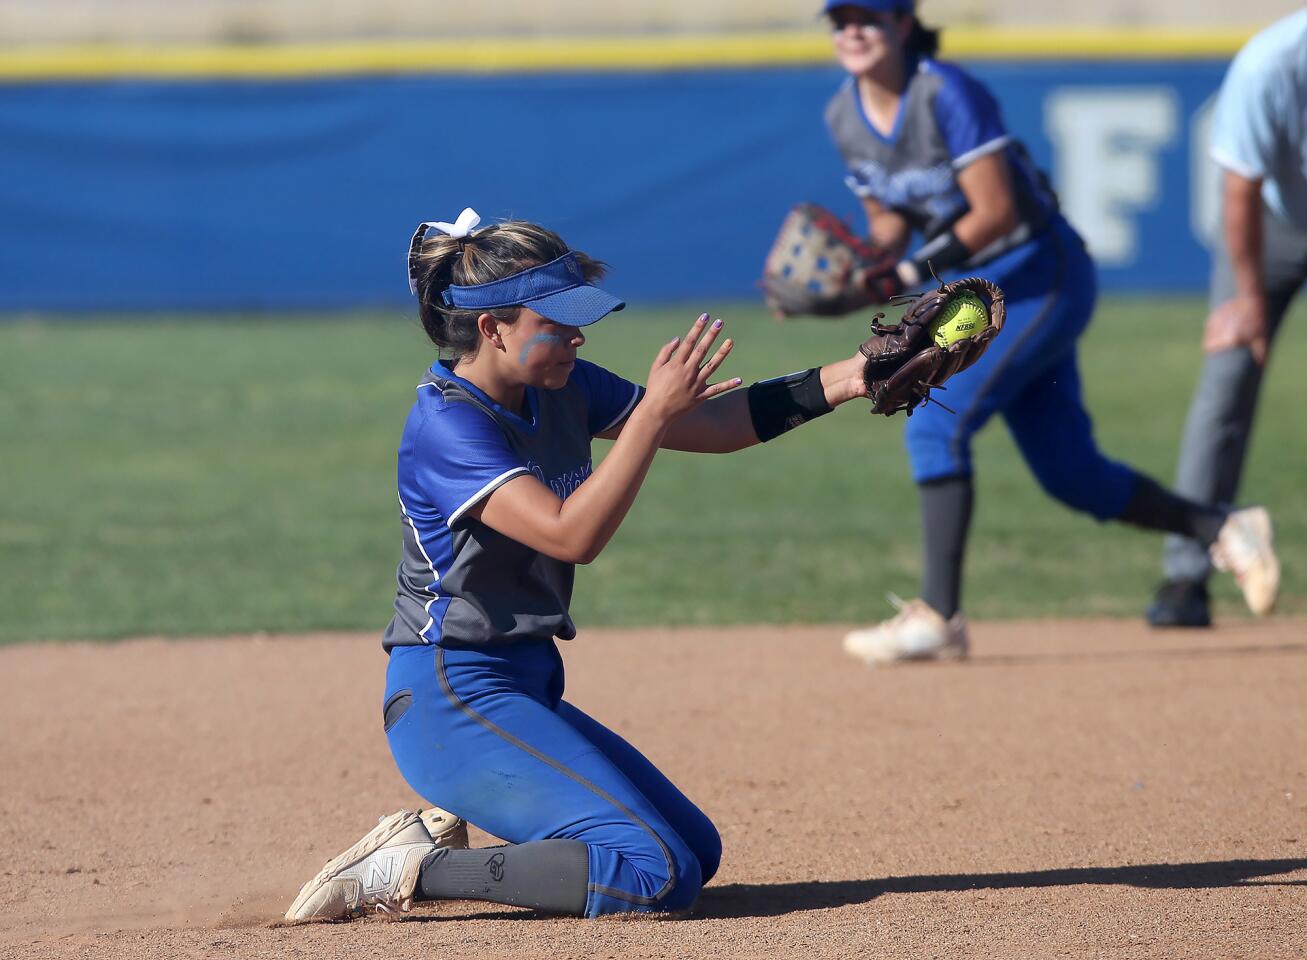 Fountain Valley's Samarta Ortega snags a line drive up the middle in a Wave League game at Newport Harbor on Wednesday.